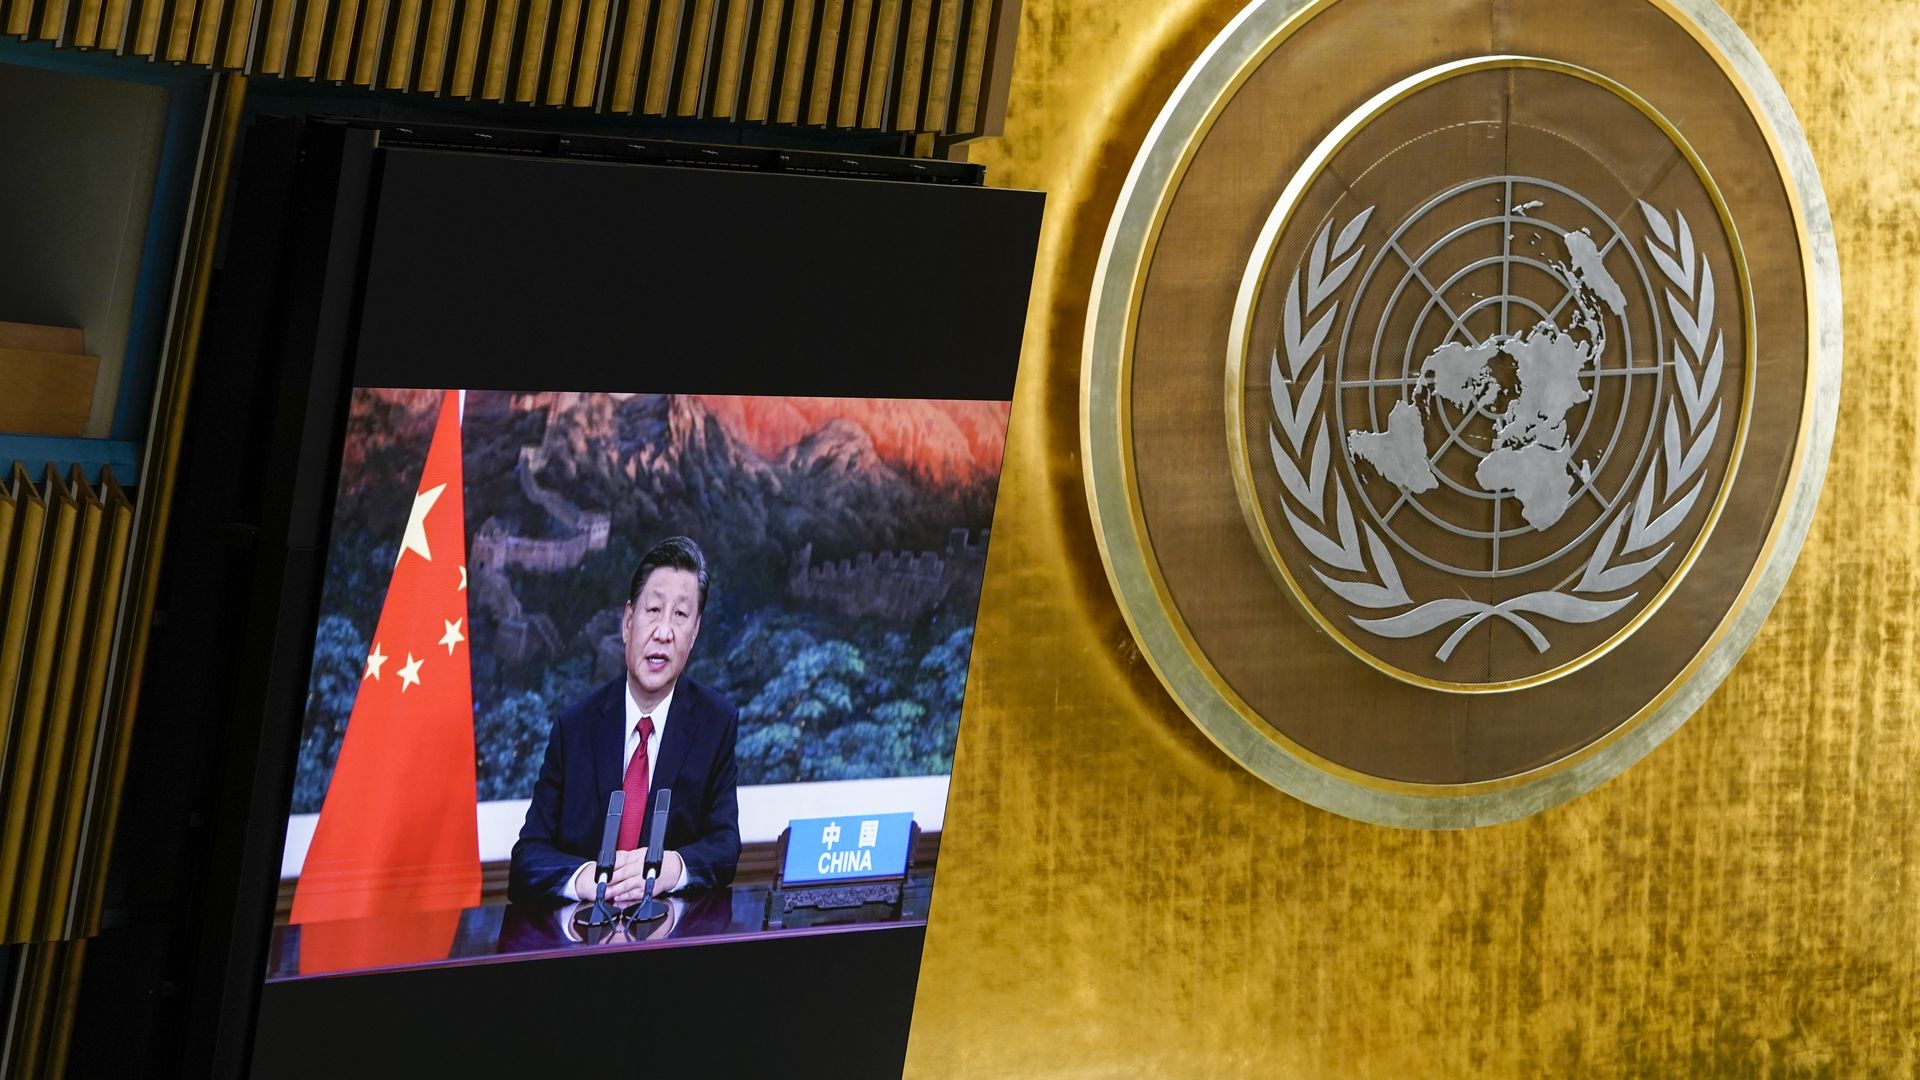 Chinese President Xi Jinping addresses the annual gathering in New York City for the 76th session of the United Nations General Assembly (UNGA) on September 21, 2021 in New York City.